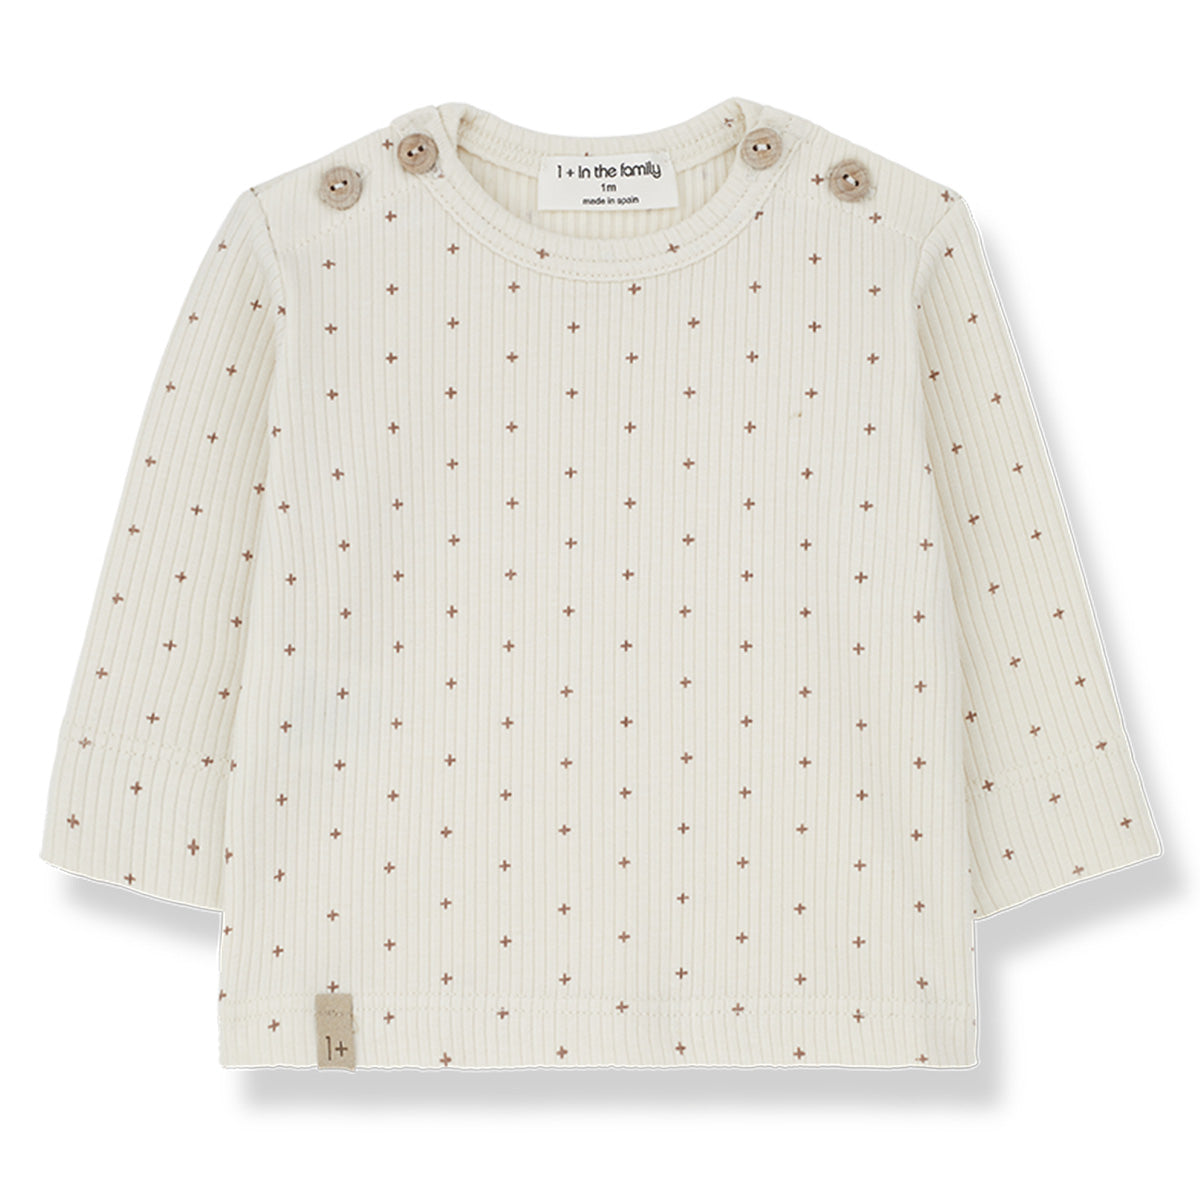 The Aless Long Sleeve Tee from 1 + in the Family. Crew neck, Long sleeves, Ribbed, Button(s) on the shoulders, Star print